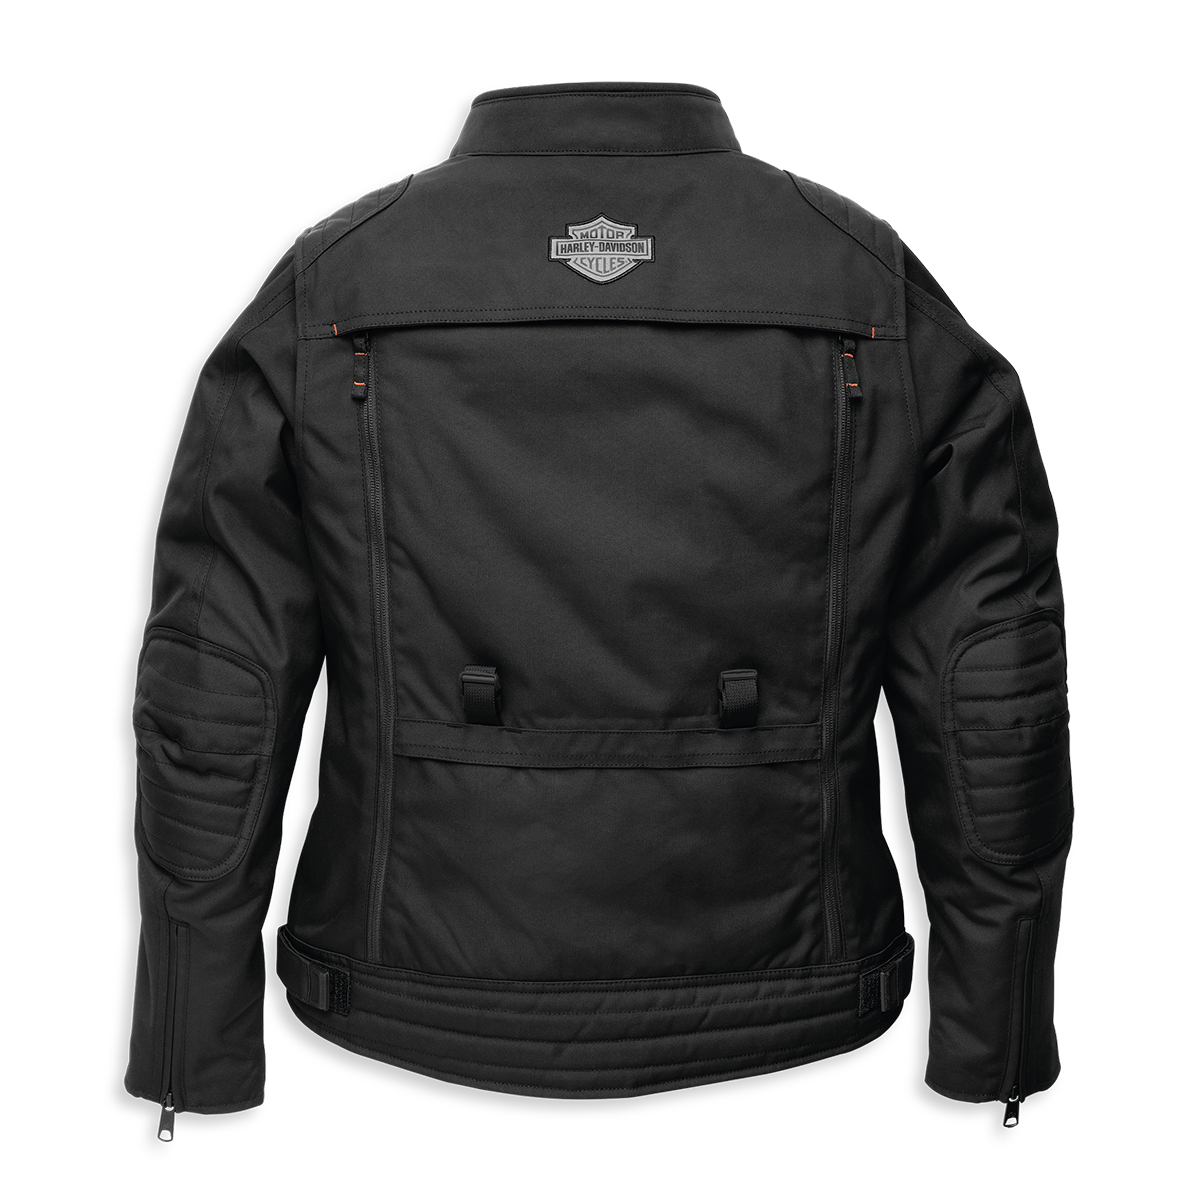 Harley-Davidson Bagger Women's Textile Riding Jacket with Backpack